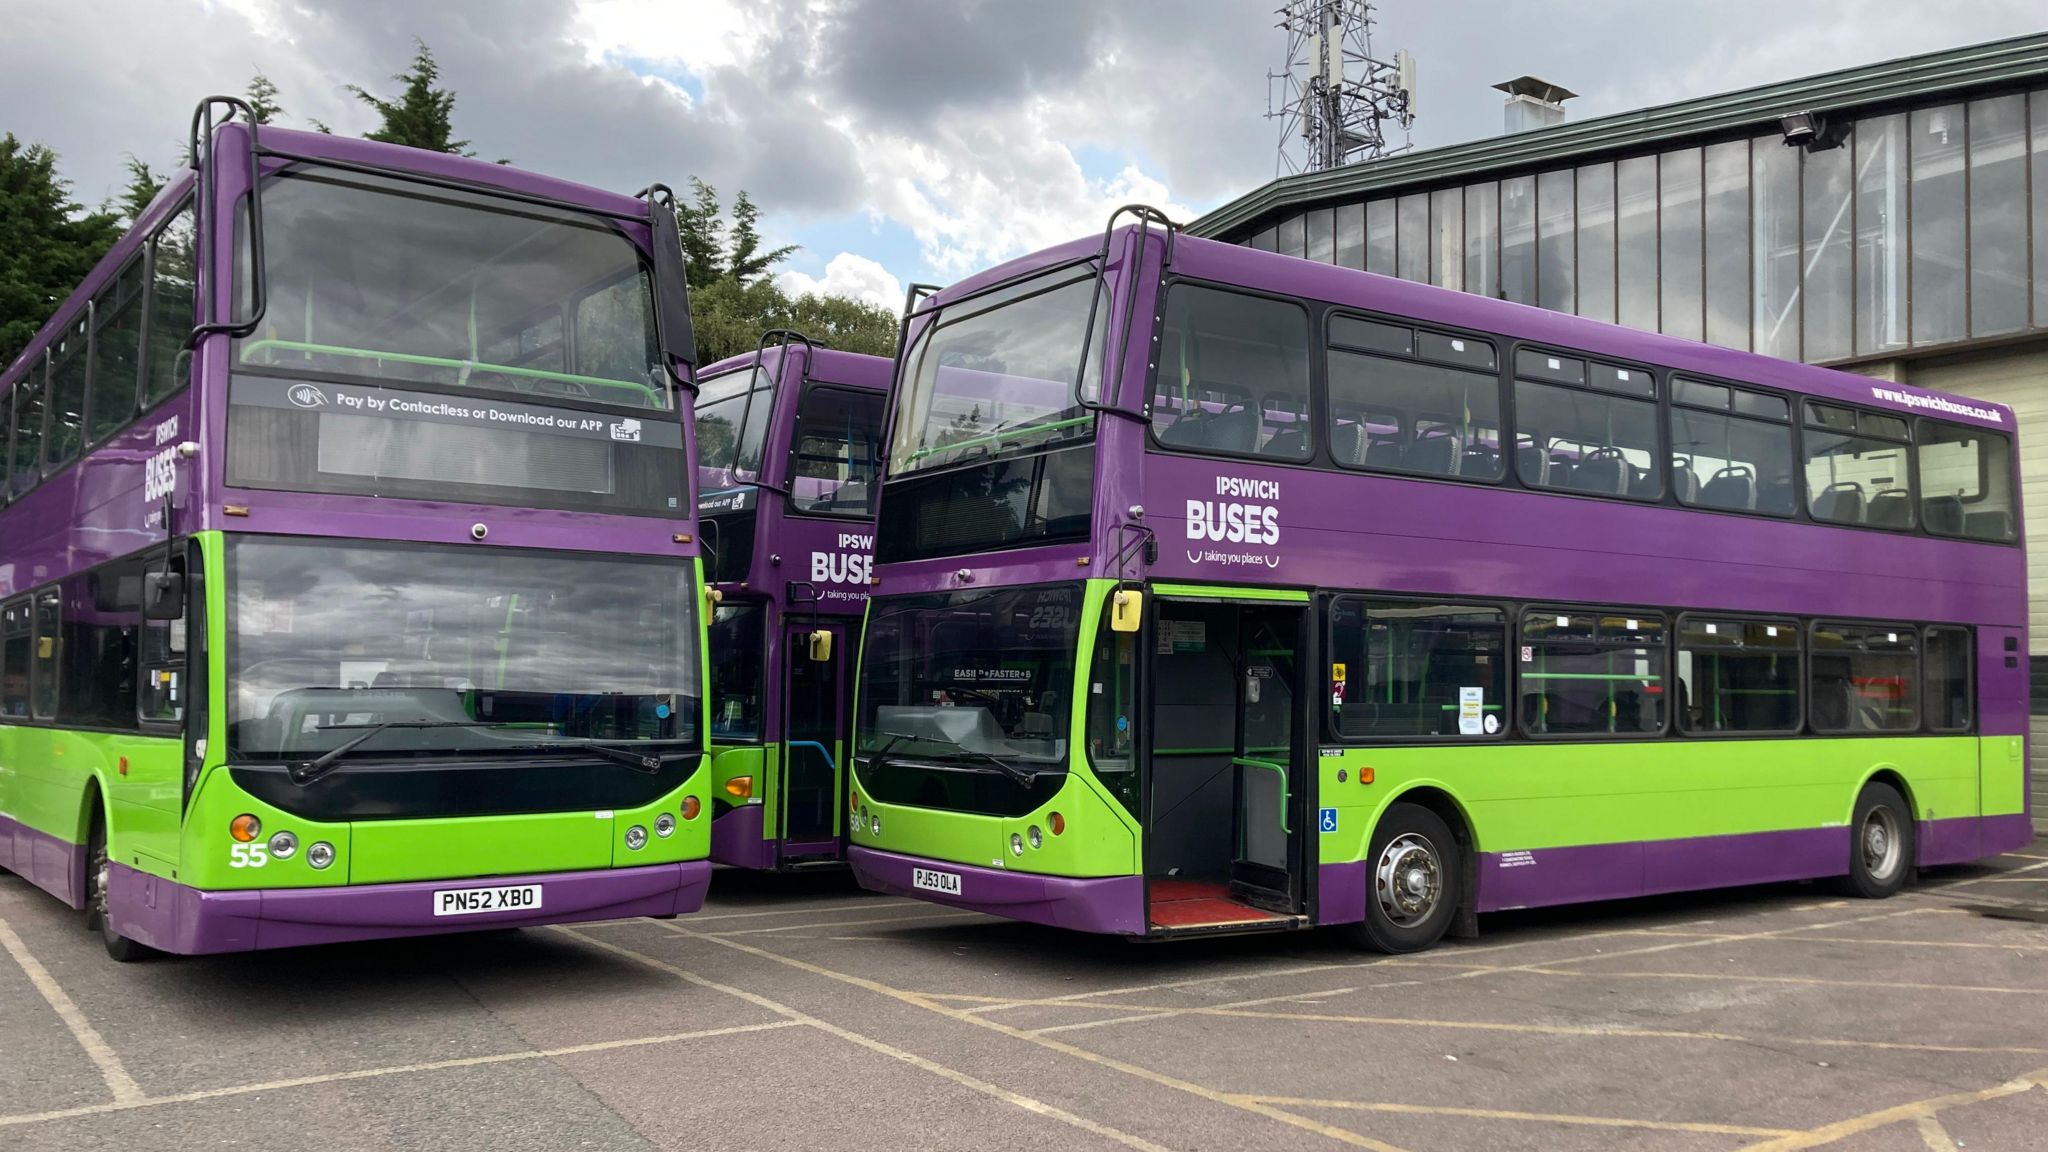 A general view of two Ipswich Buses 